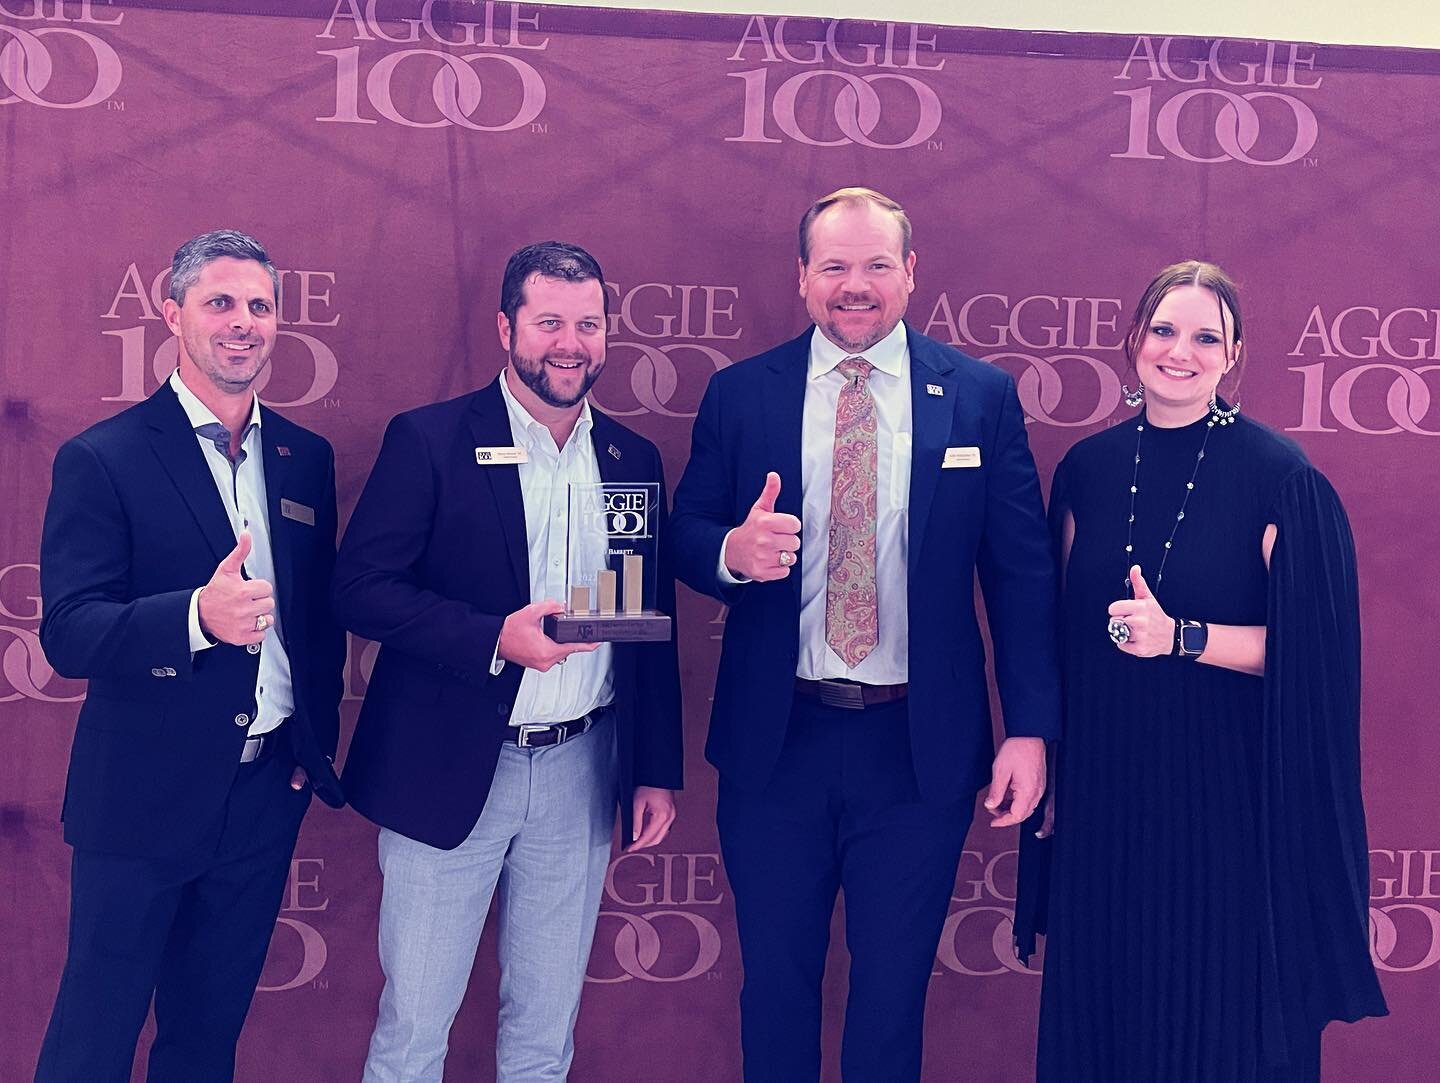 On Friday night, Stafford Barrett was recognized as one of the fastest growing Aggie-owned businesses in the world with our second consecutive #Aggie100 award! Stafford Barrett was recognized as the 28th fastest growing Aggie business. Thanks to our 